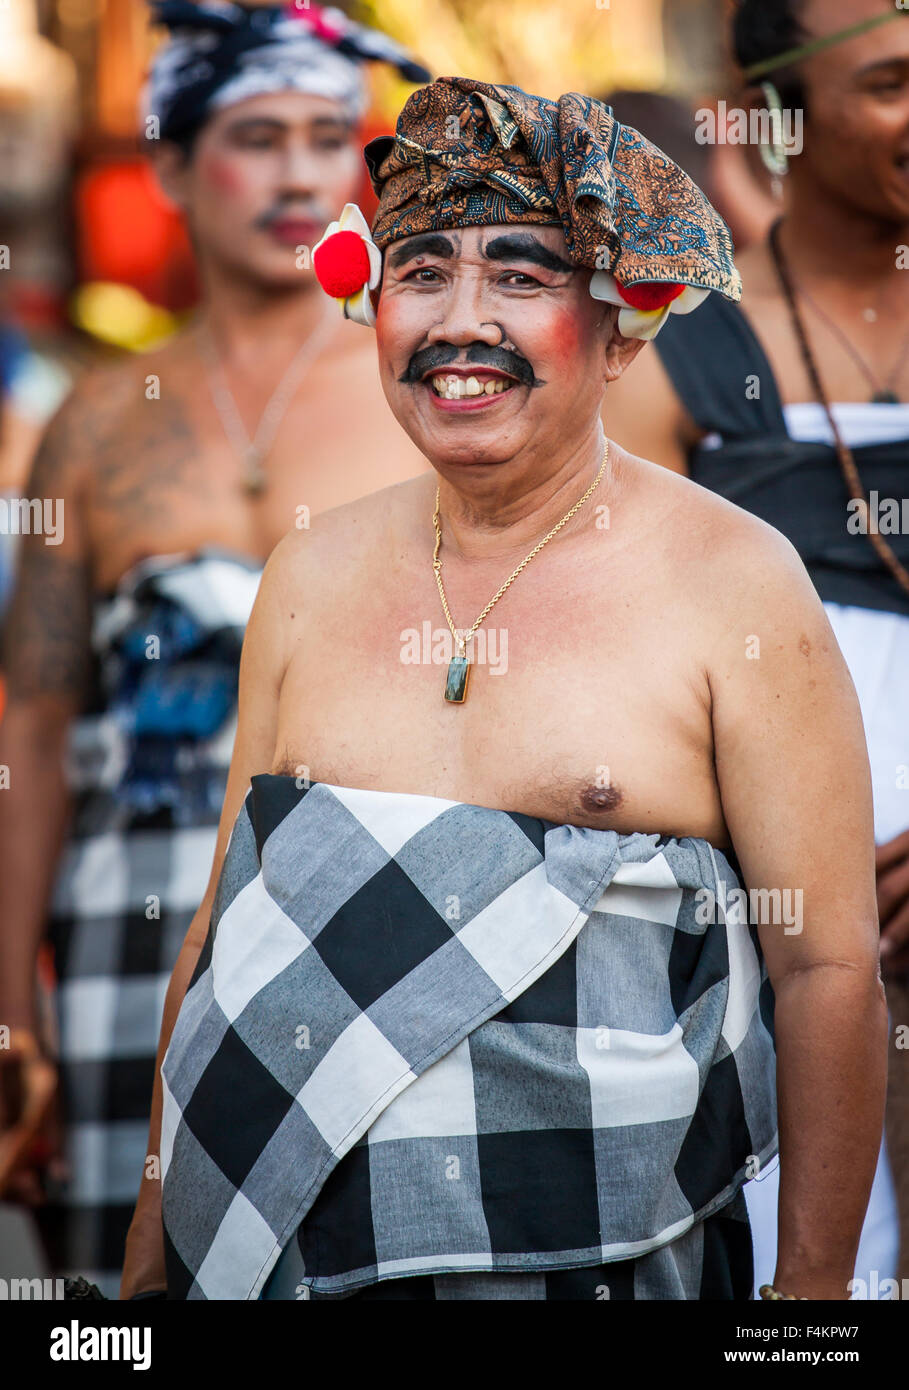 Balinese man in traditional attire at Sanur Village Festival's street parade on August 30th, 2015 in Bali, Indonesia. Stock Photo